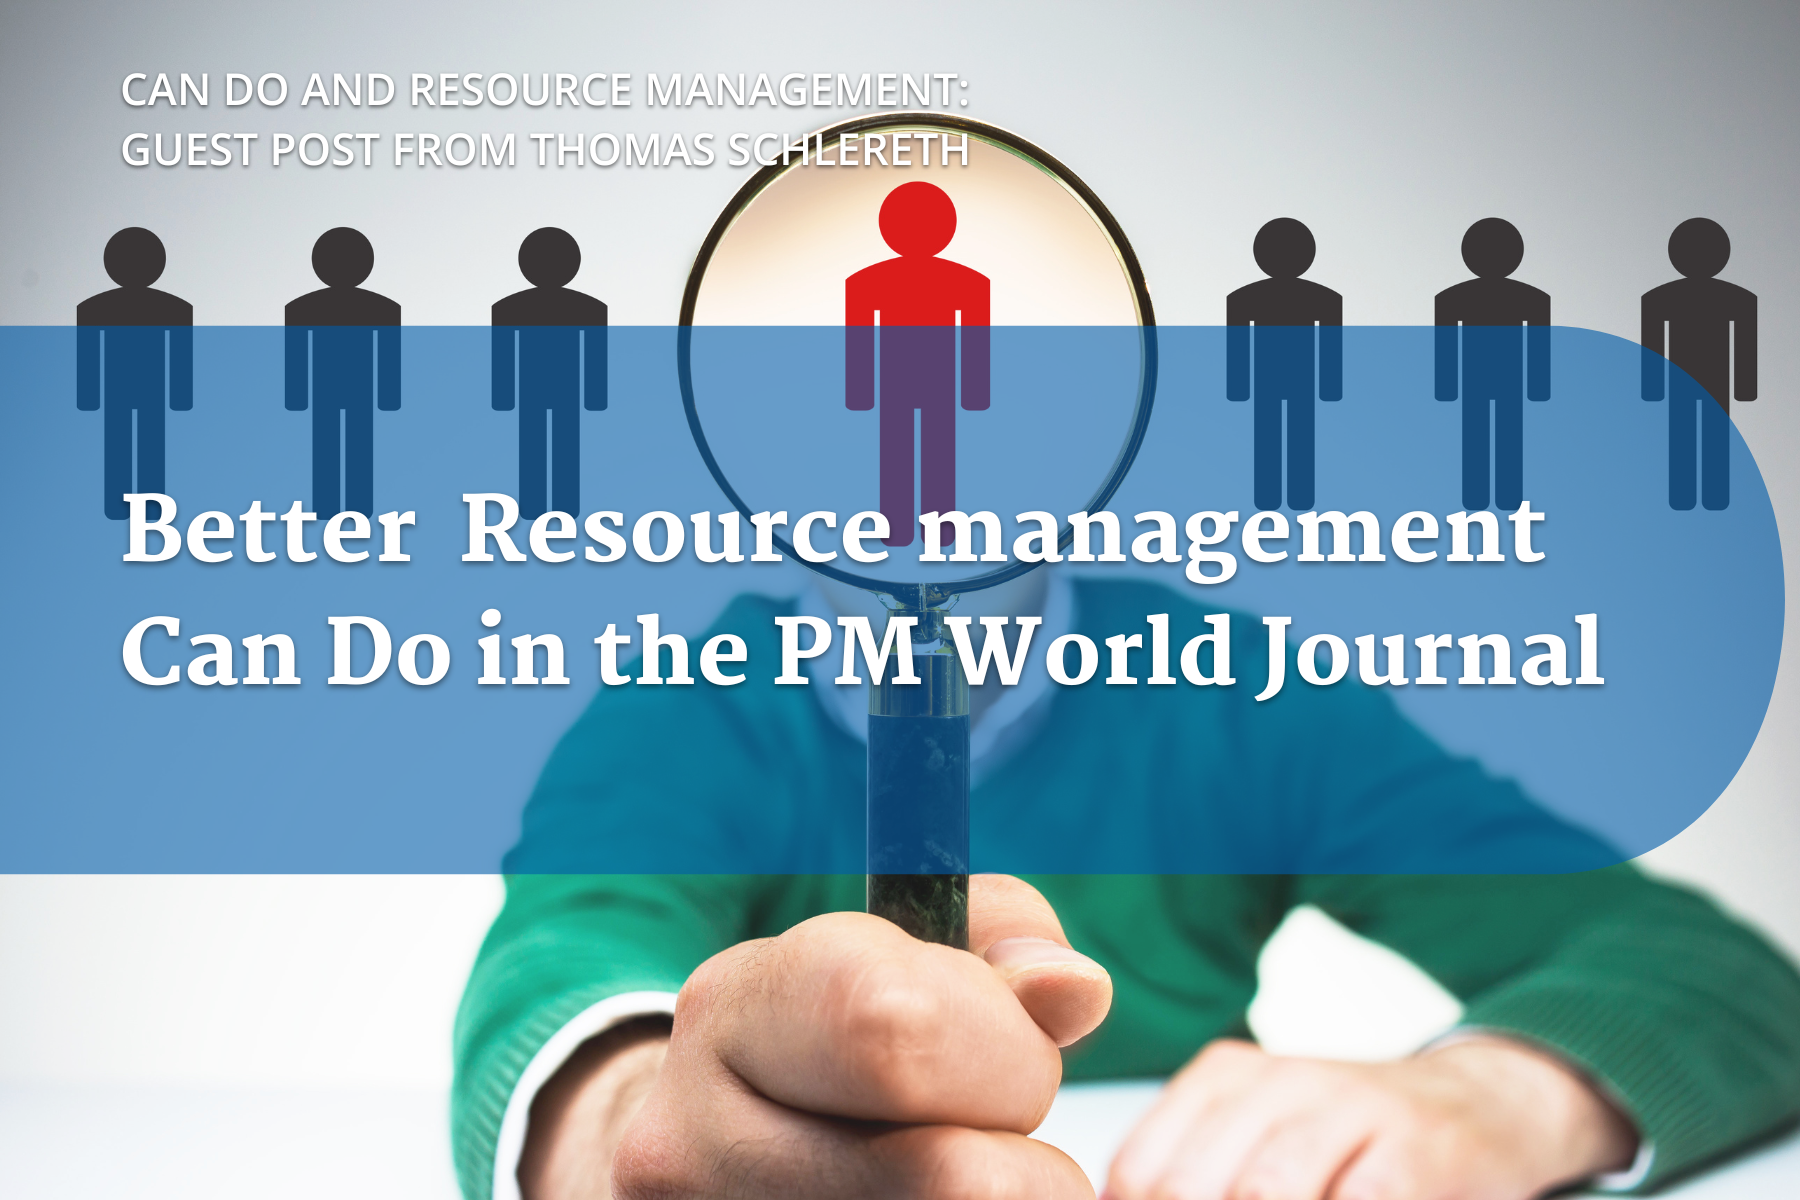 Better resource management: Can Do in the PM World Journal